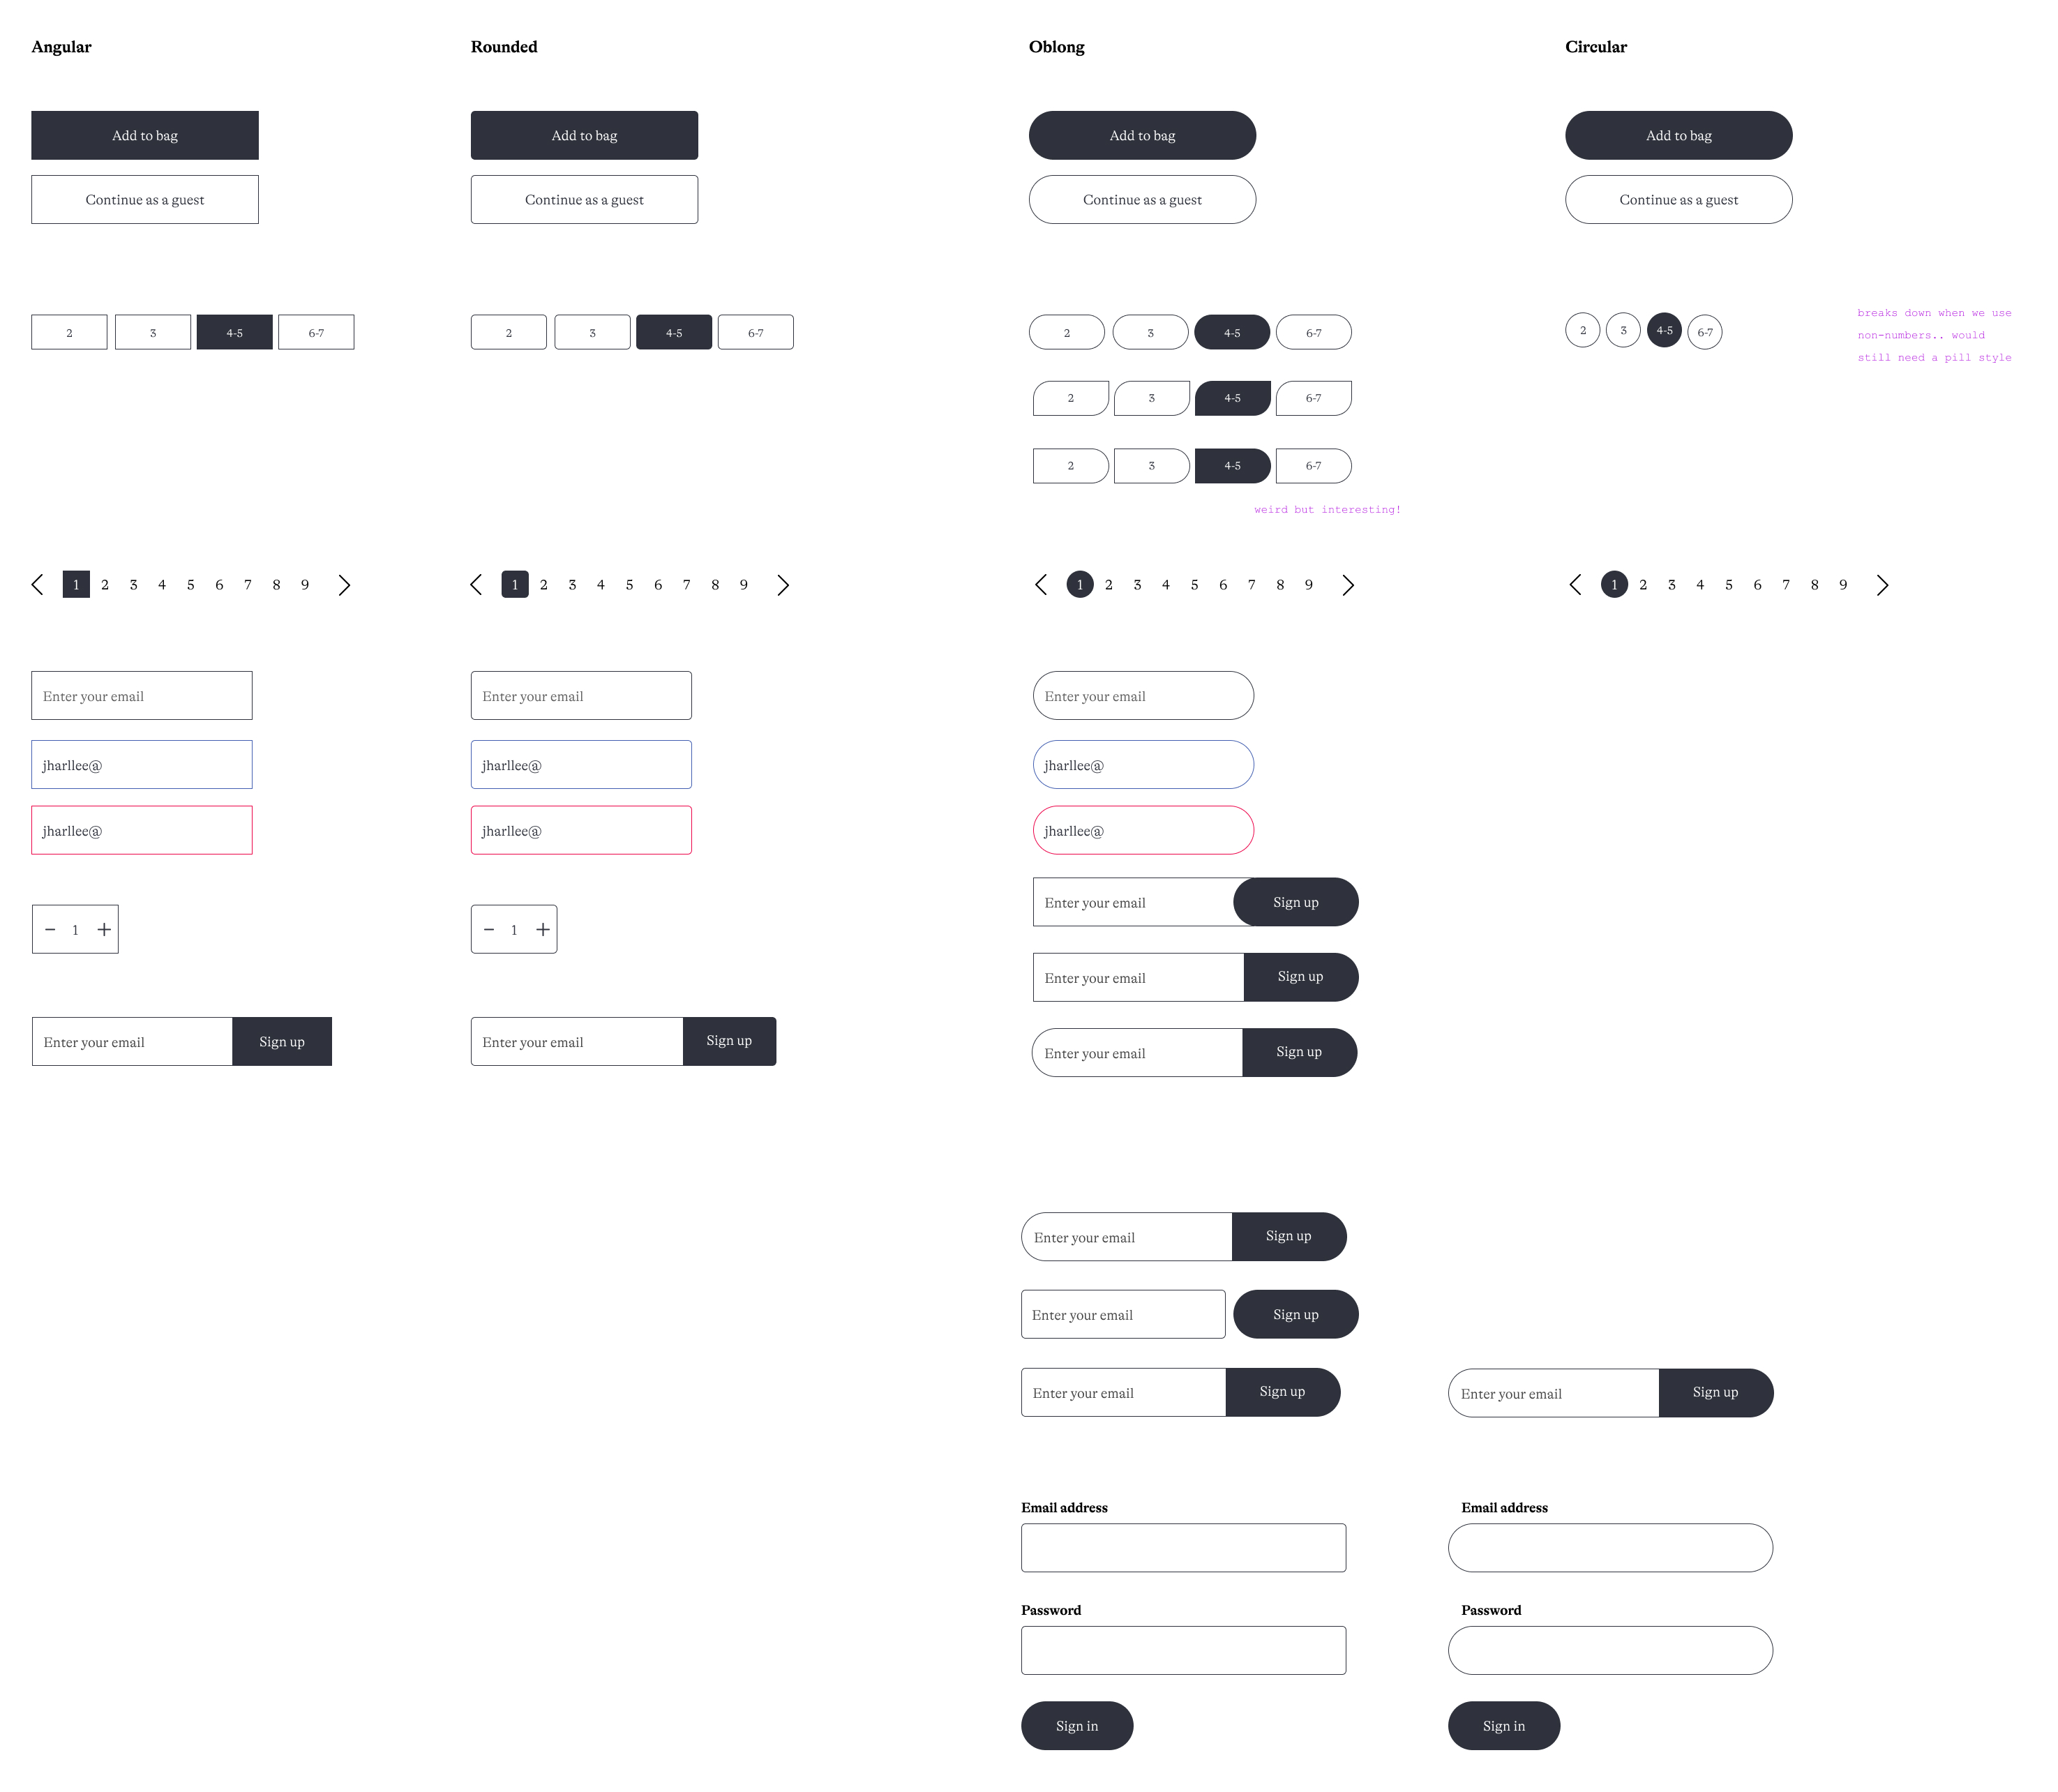 A grid of buttons, inputs, and other UI elements, each with different styles applied: angular, rounded, oblong, and circular.